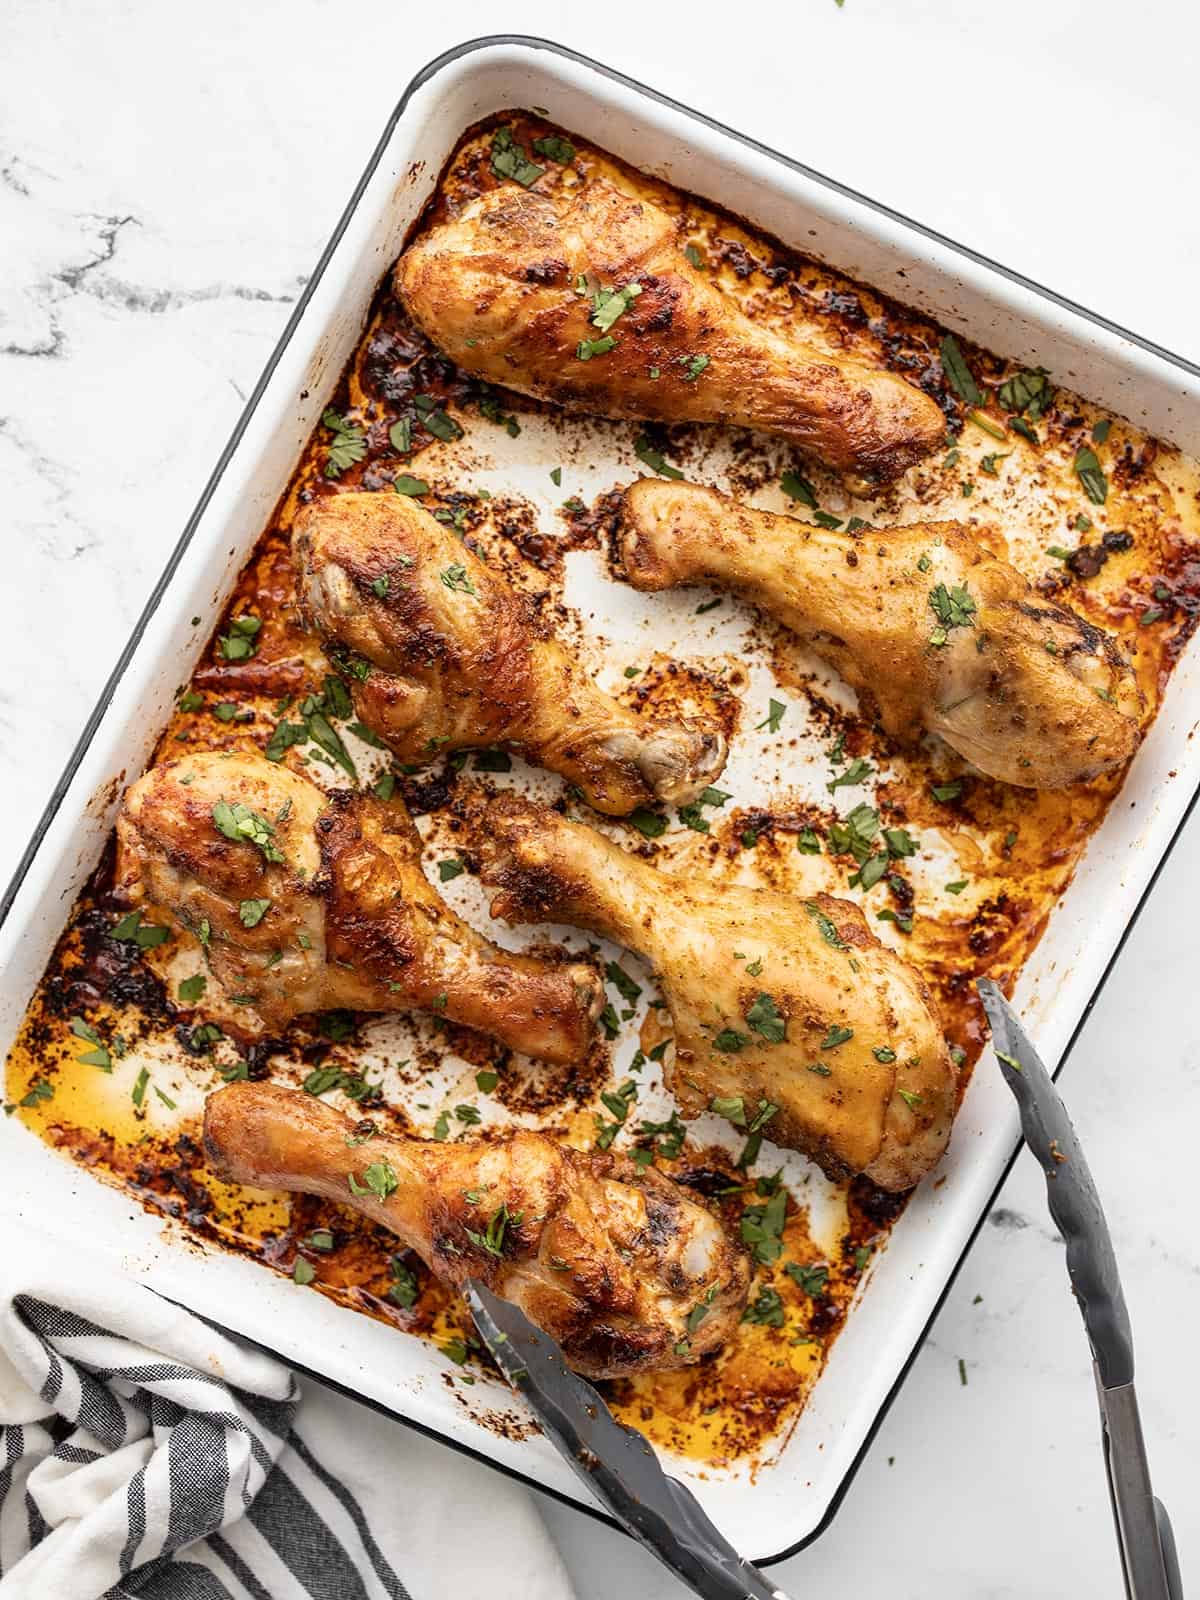 baked chicken drumsticks on a baking sheet with tongs, garnished with parsley